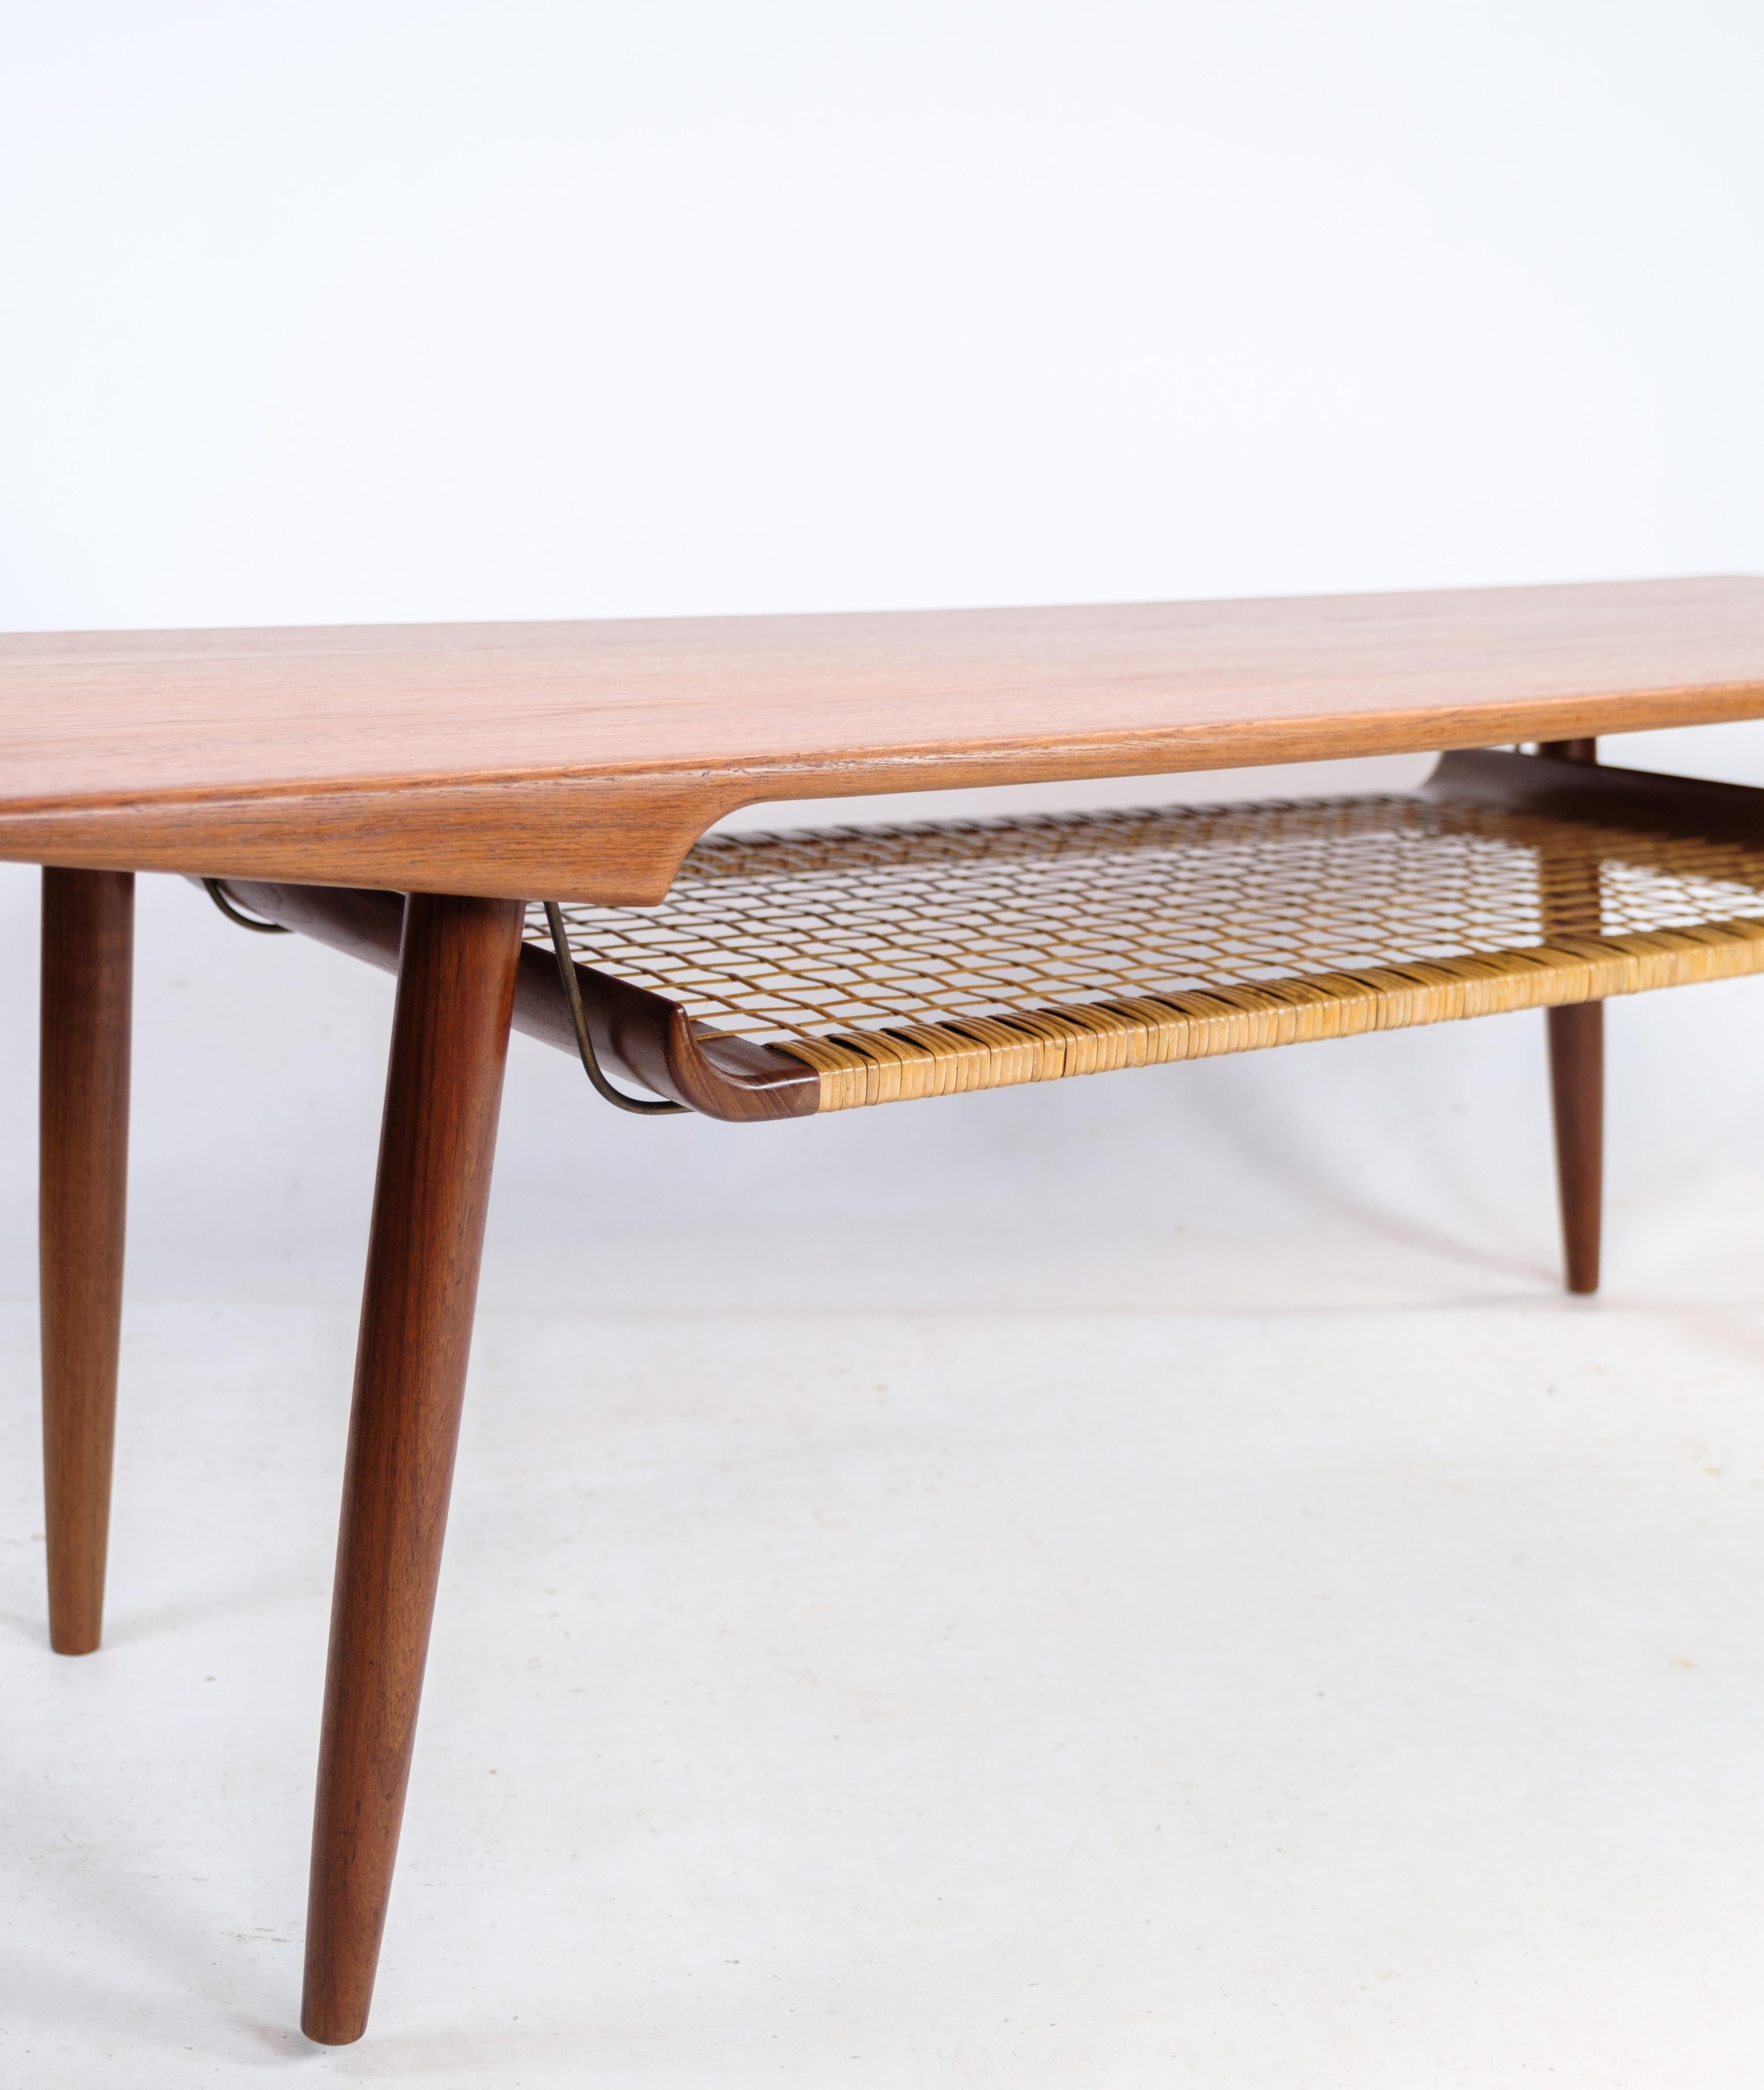 Coffee Table in Teak and Paper Cord Shelf of Danish Design from the 1960s For Sale 5